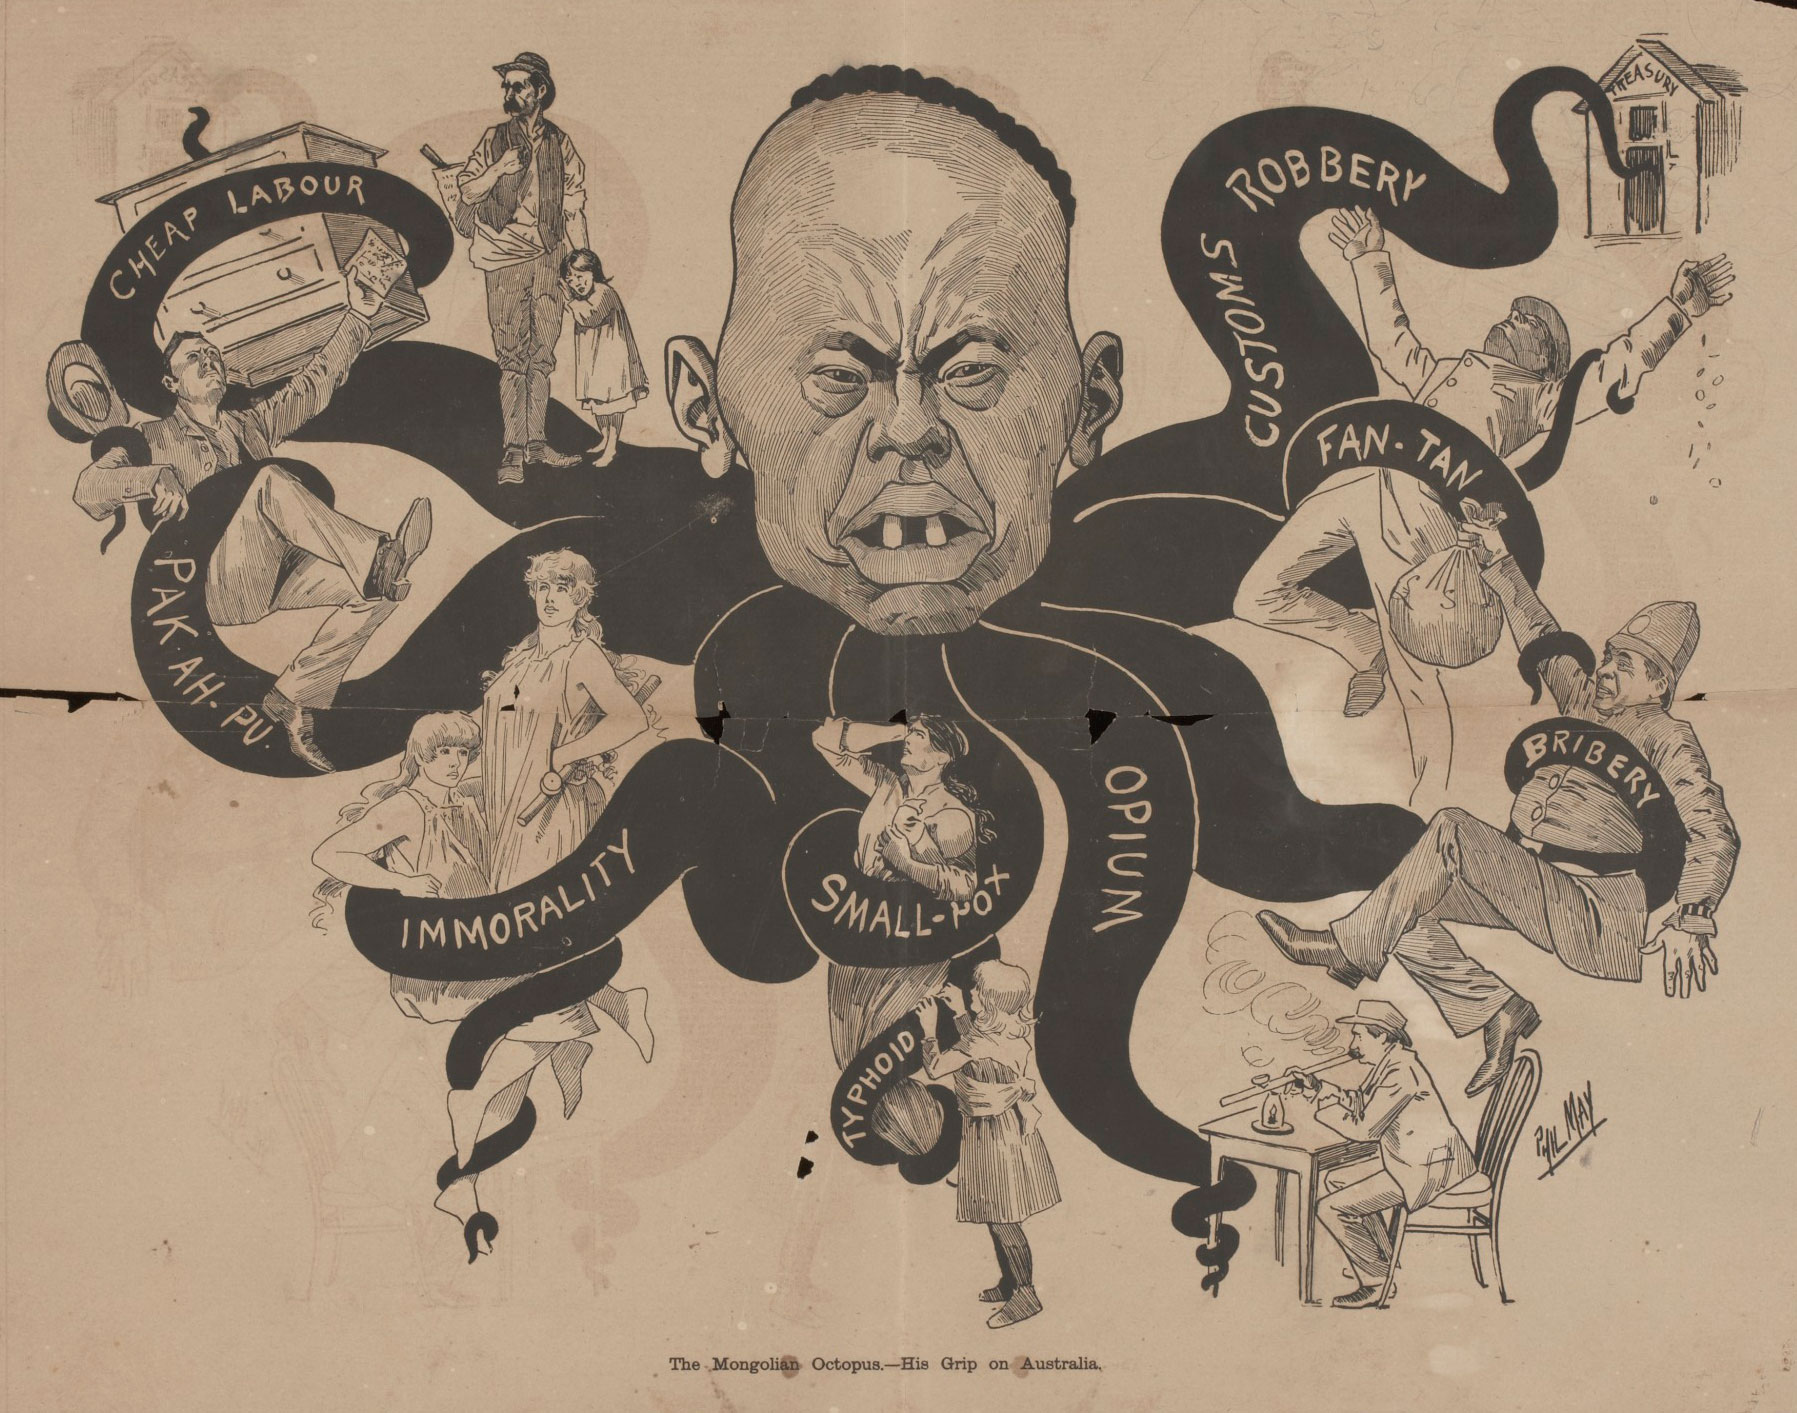 An anti-Chinese cartoon titled ‘The Mongolian Octopus’, published in the Bulletin in 1886.